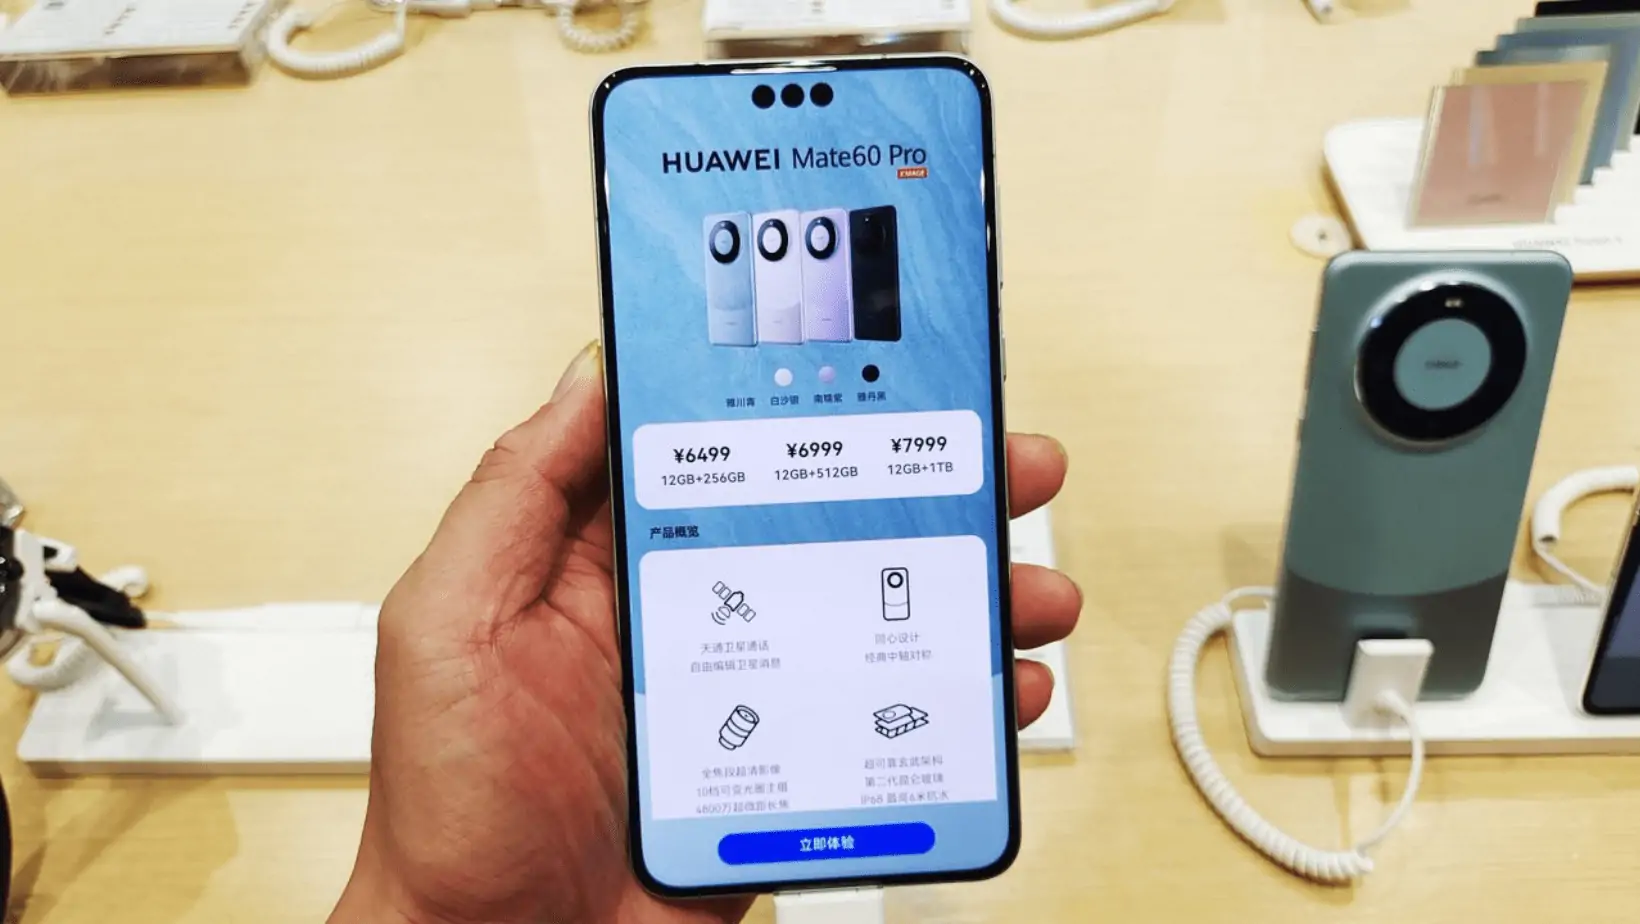 Huawei’s Mate 60 Pro+: Specs, Pricing, and Global Release?